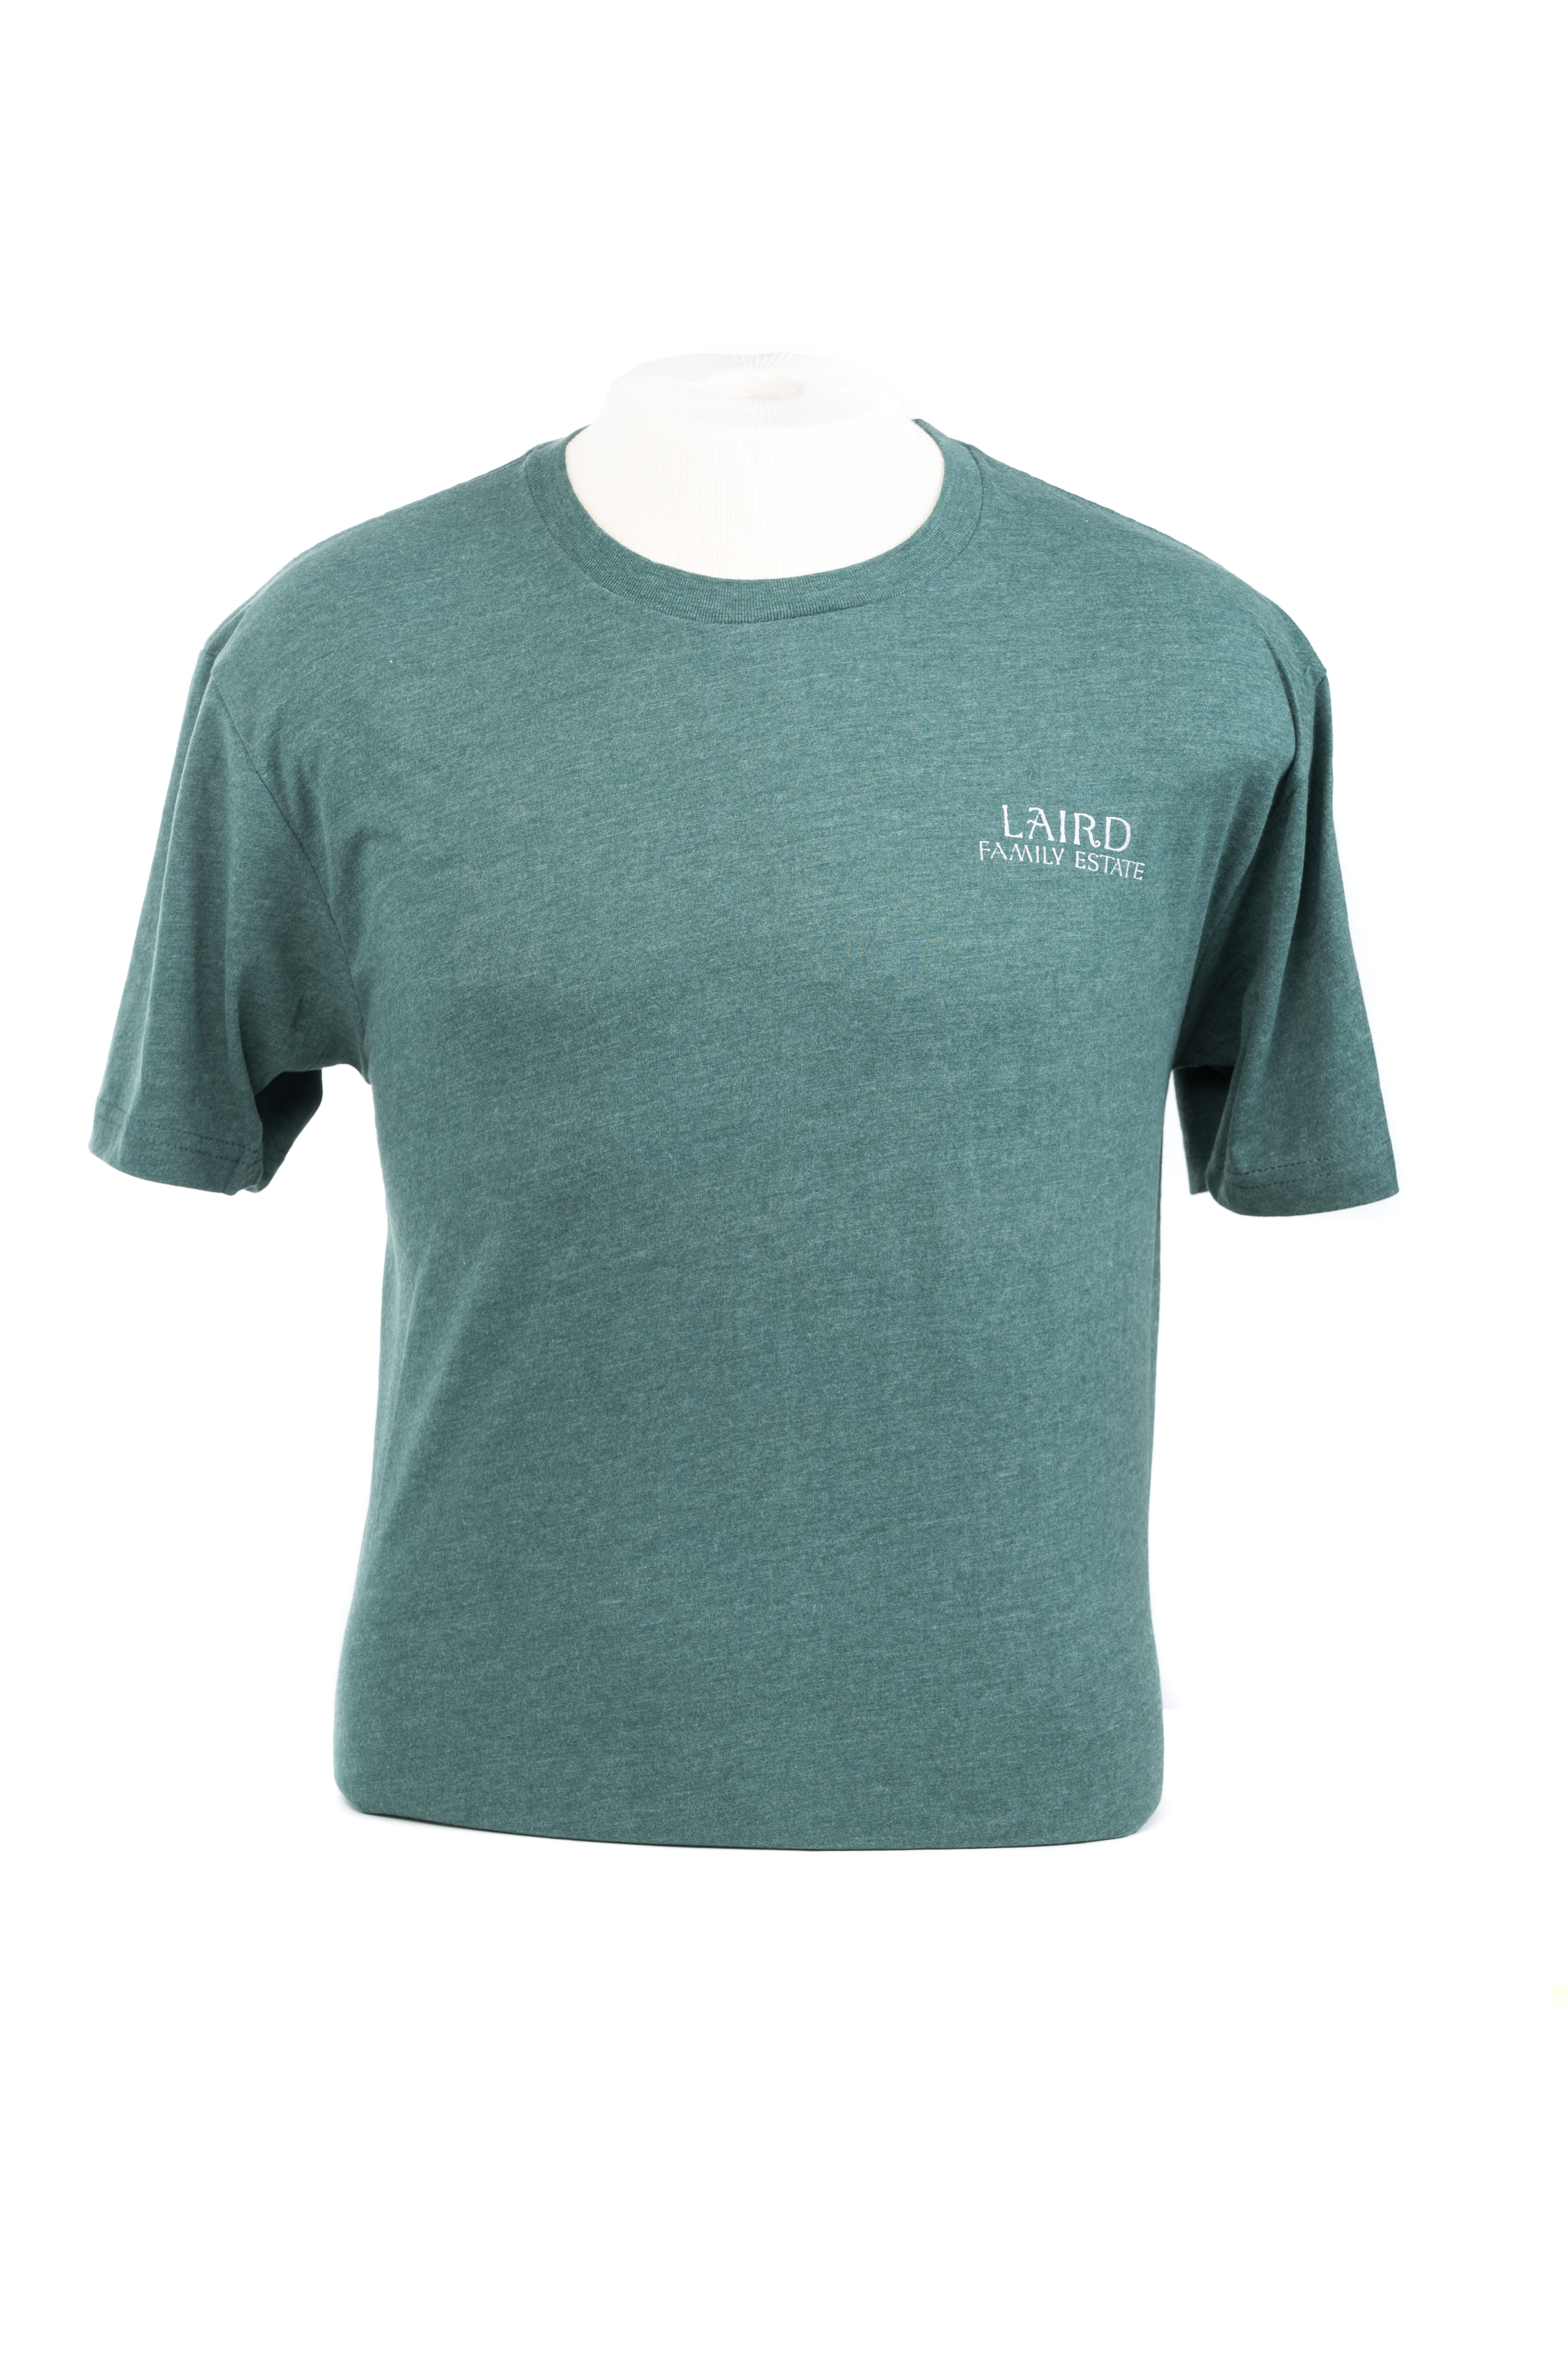 Product Image for Men's Sueded Crew Neck T-Shirt - Heather Forest Green